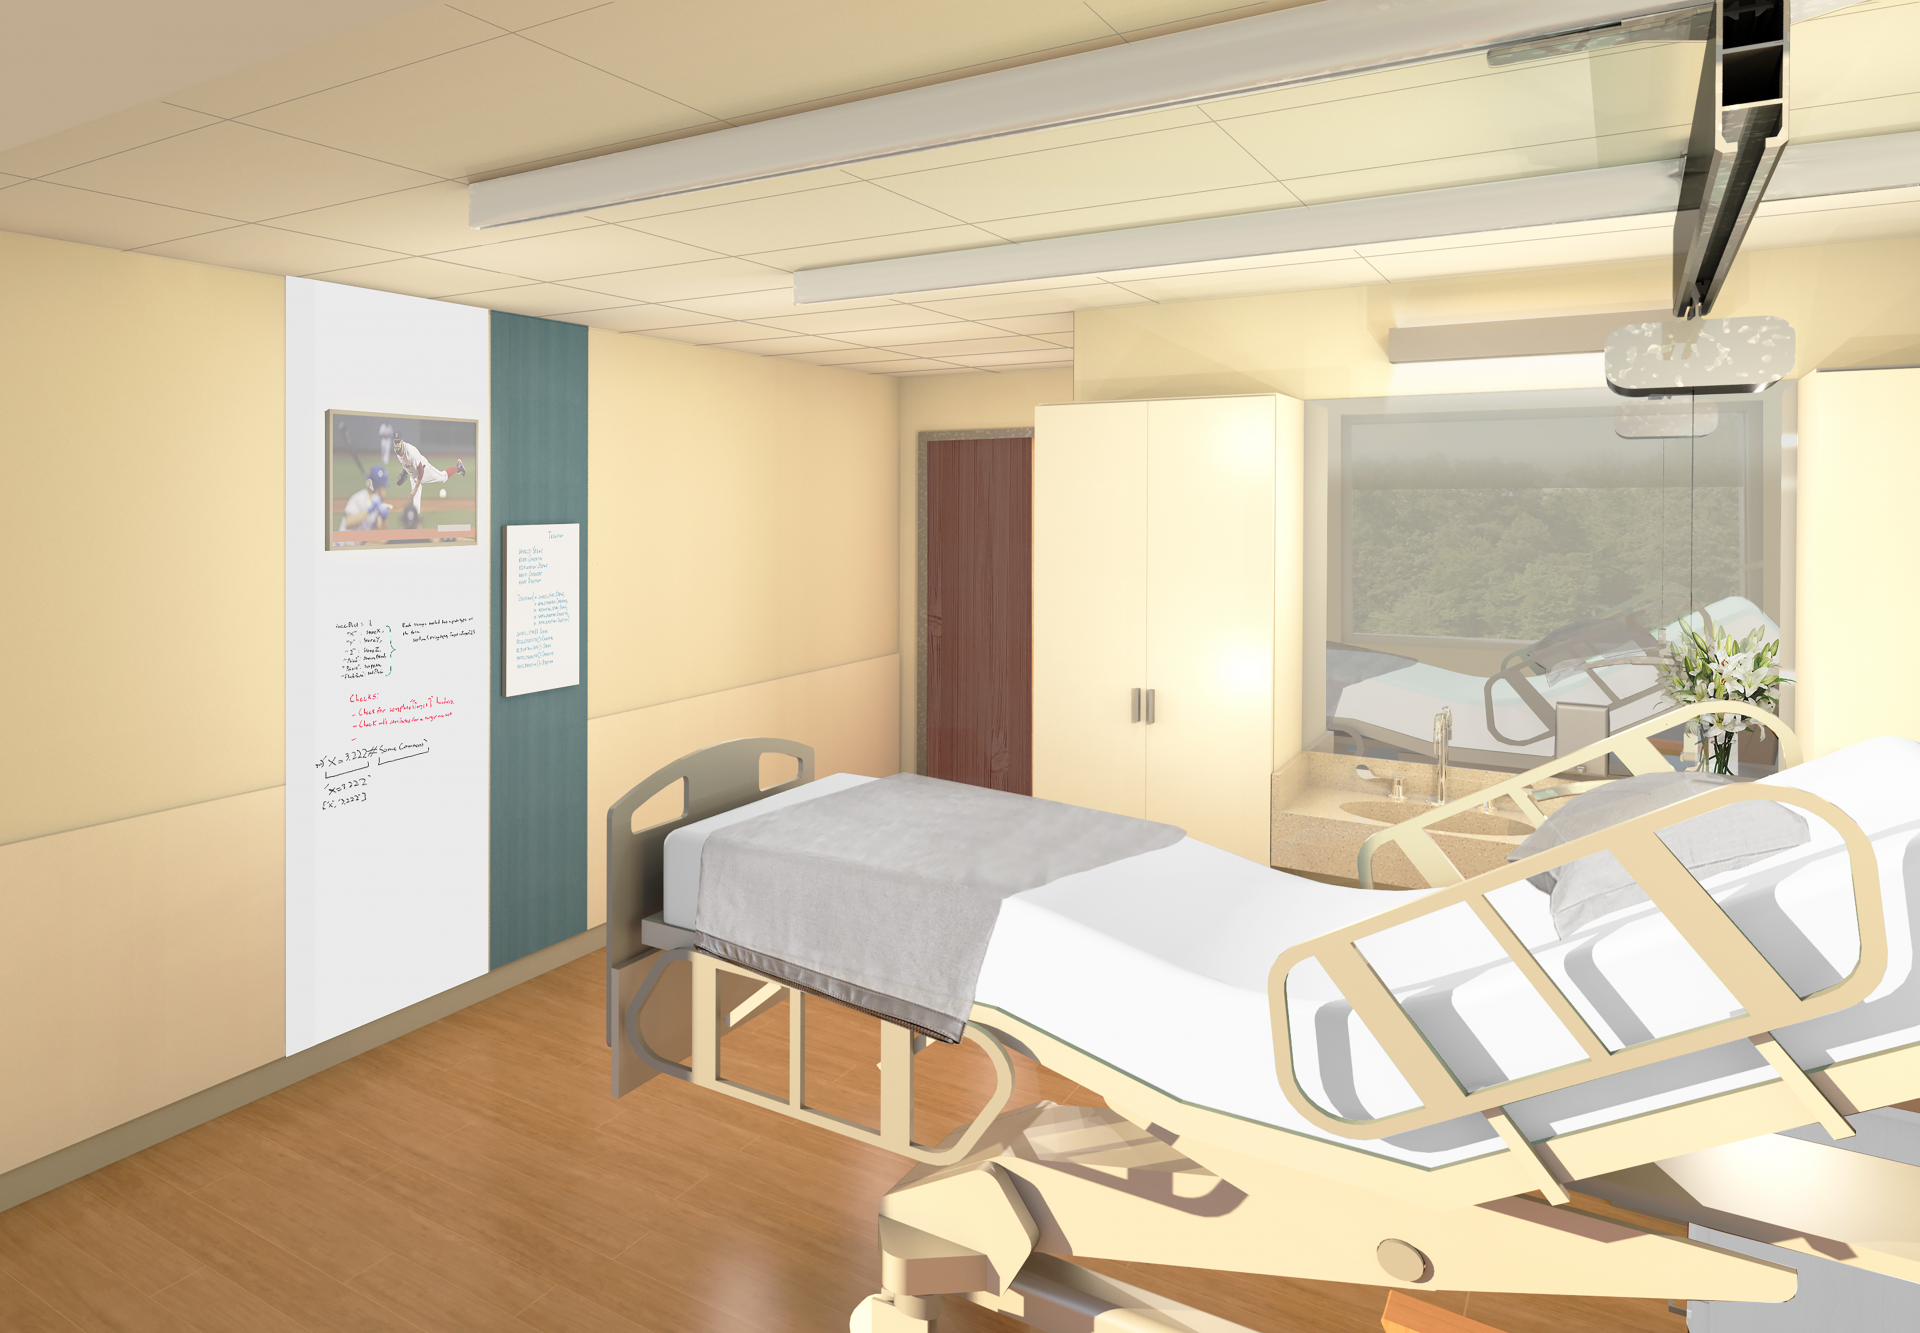 O,R&L Construction named Construction Manager for Gaylord Specialty Healthcare Renovations